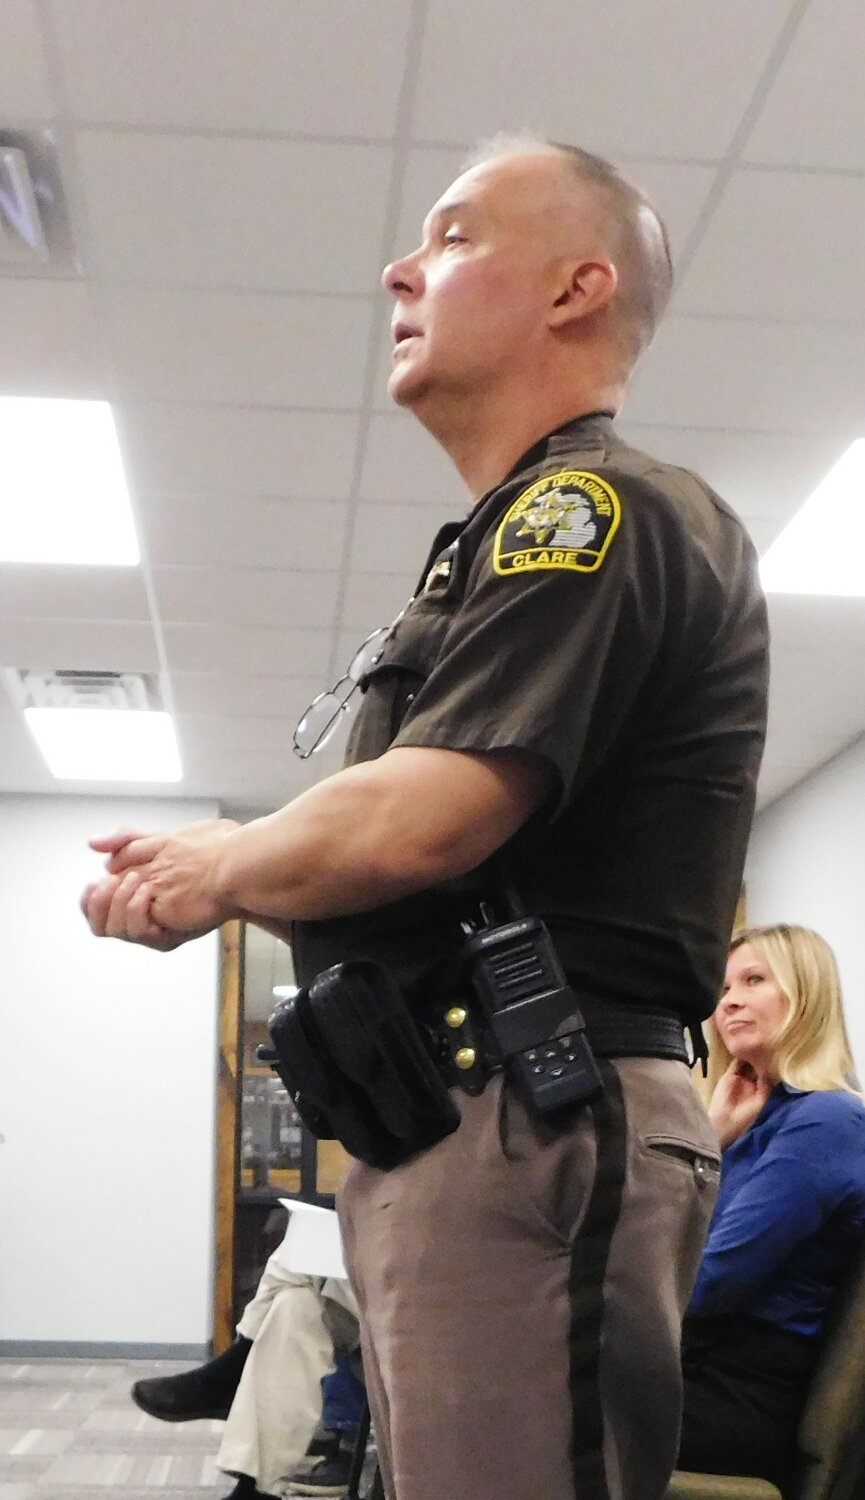 Undersheriff Dwayne Miedzianowski apprises commissioners of National Telecommunications Week, National Correctional Officers Week and National Police Week, as well as thanking those who protect and serve to make the community a better place.